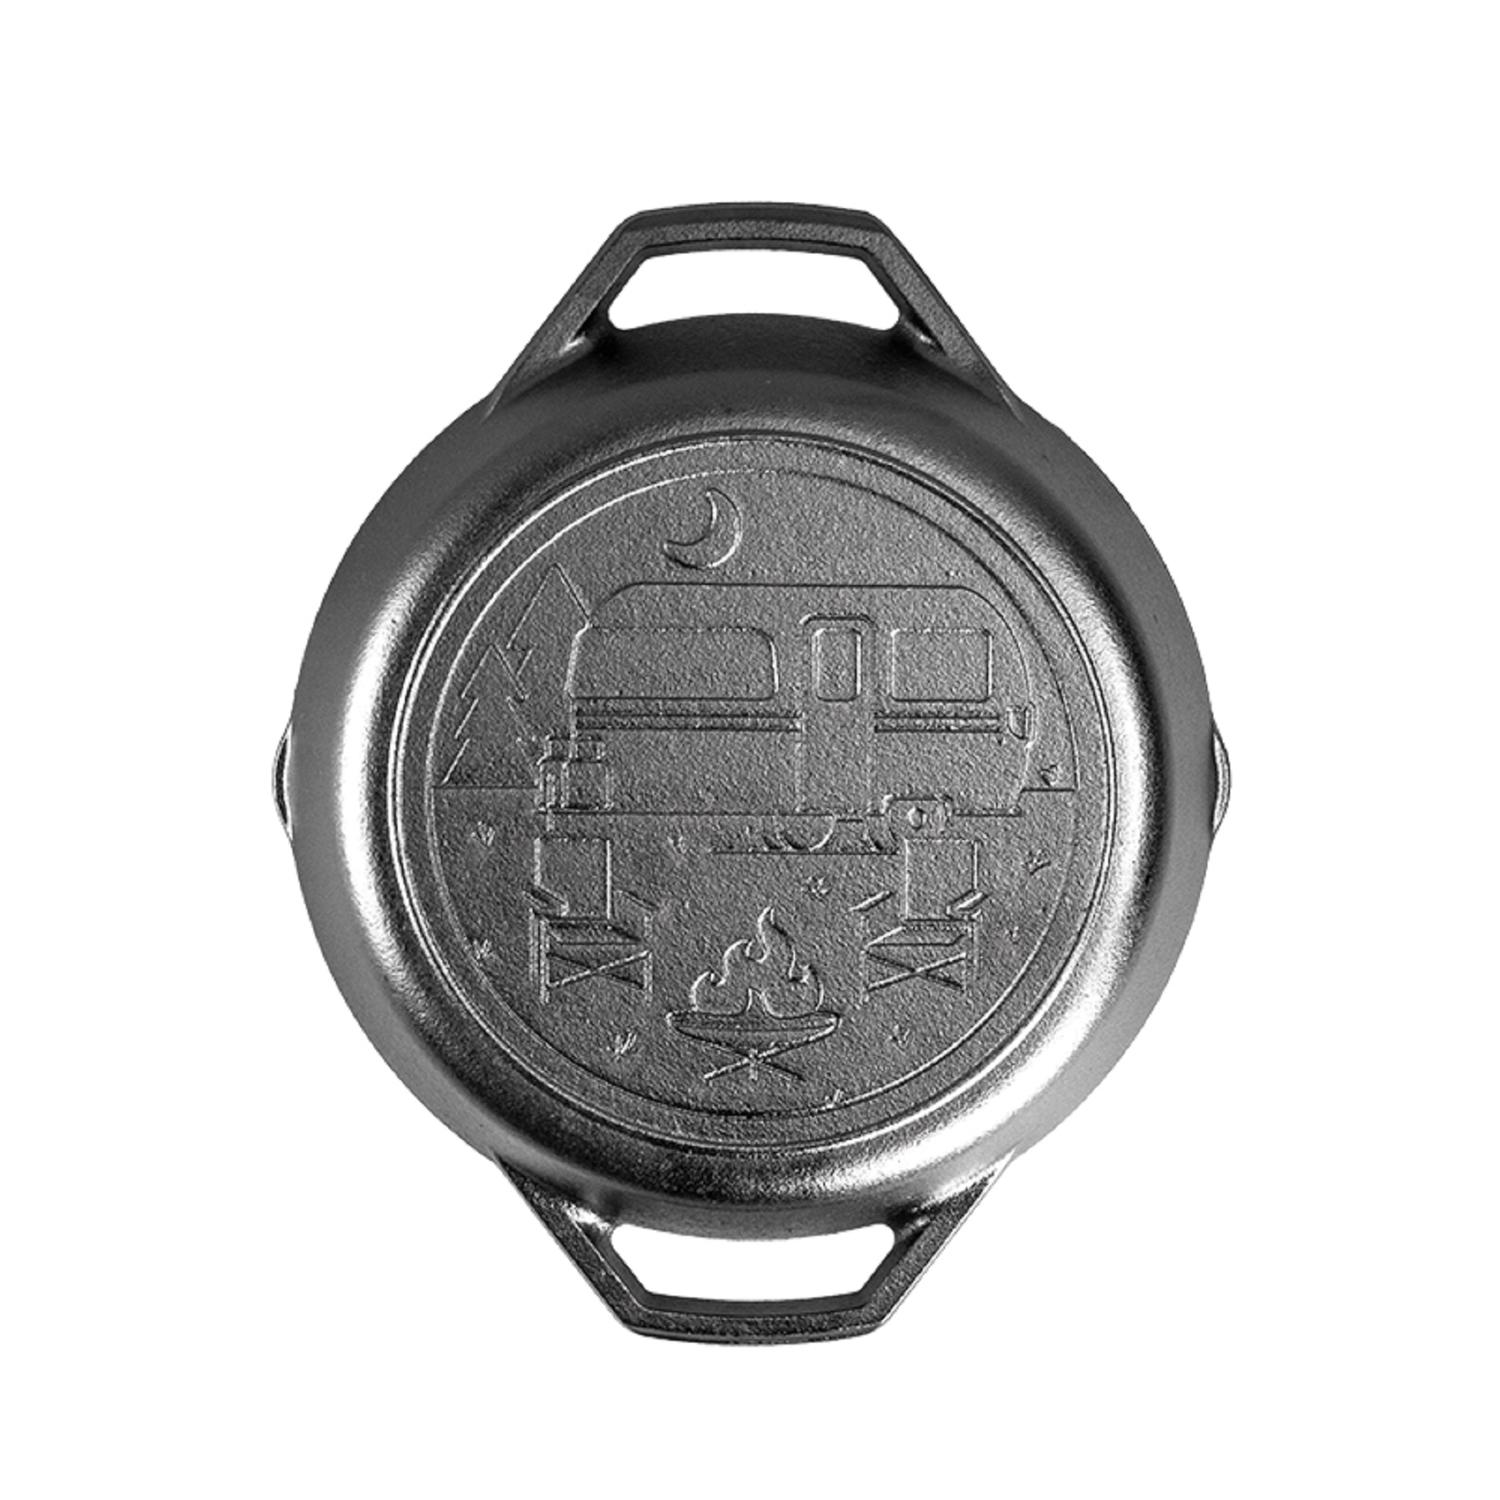 Photos - Other Accessories Lodge Wanderlust Cast Iron Baking Pan 10.25 in. Black L8SKLWND 